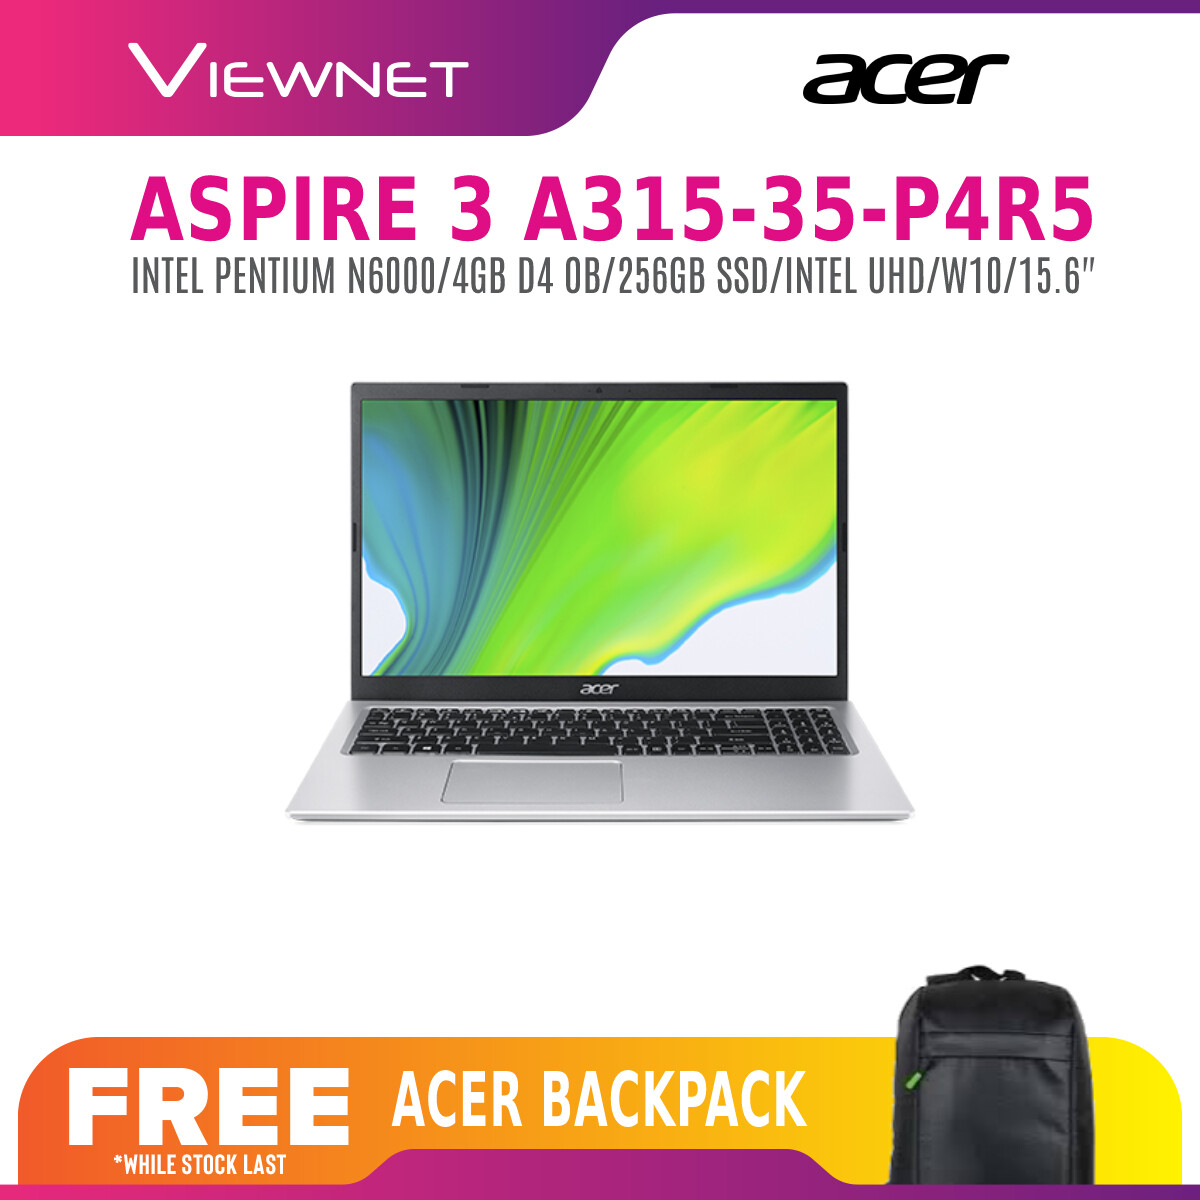 ACER ASPIRE 3 A315-35-P5JS / A315-35-P5F8 / A314-35-P9D3 / A315-35-P4R5  LAPTOP INTEL PENTIUM / 4GB RAM / 256GB PCIE NVME SSD/ 15.6-INCH/14-INCH FHD / WIN 10 FREE BACKPACK